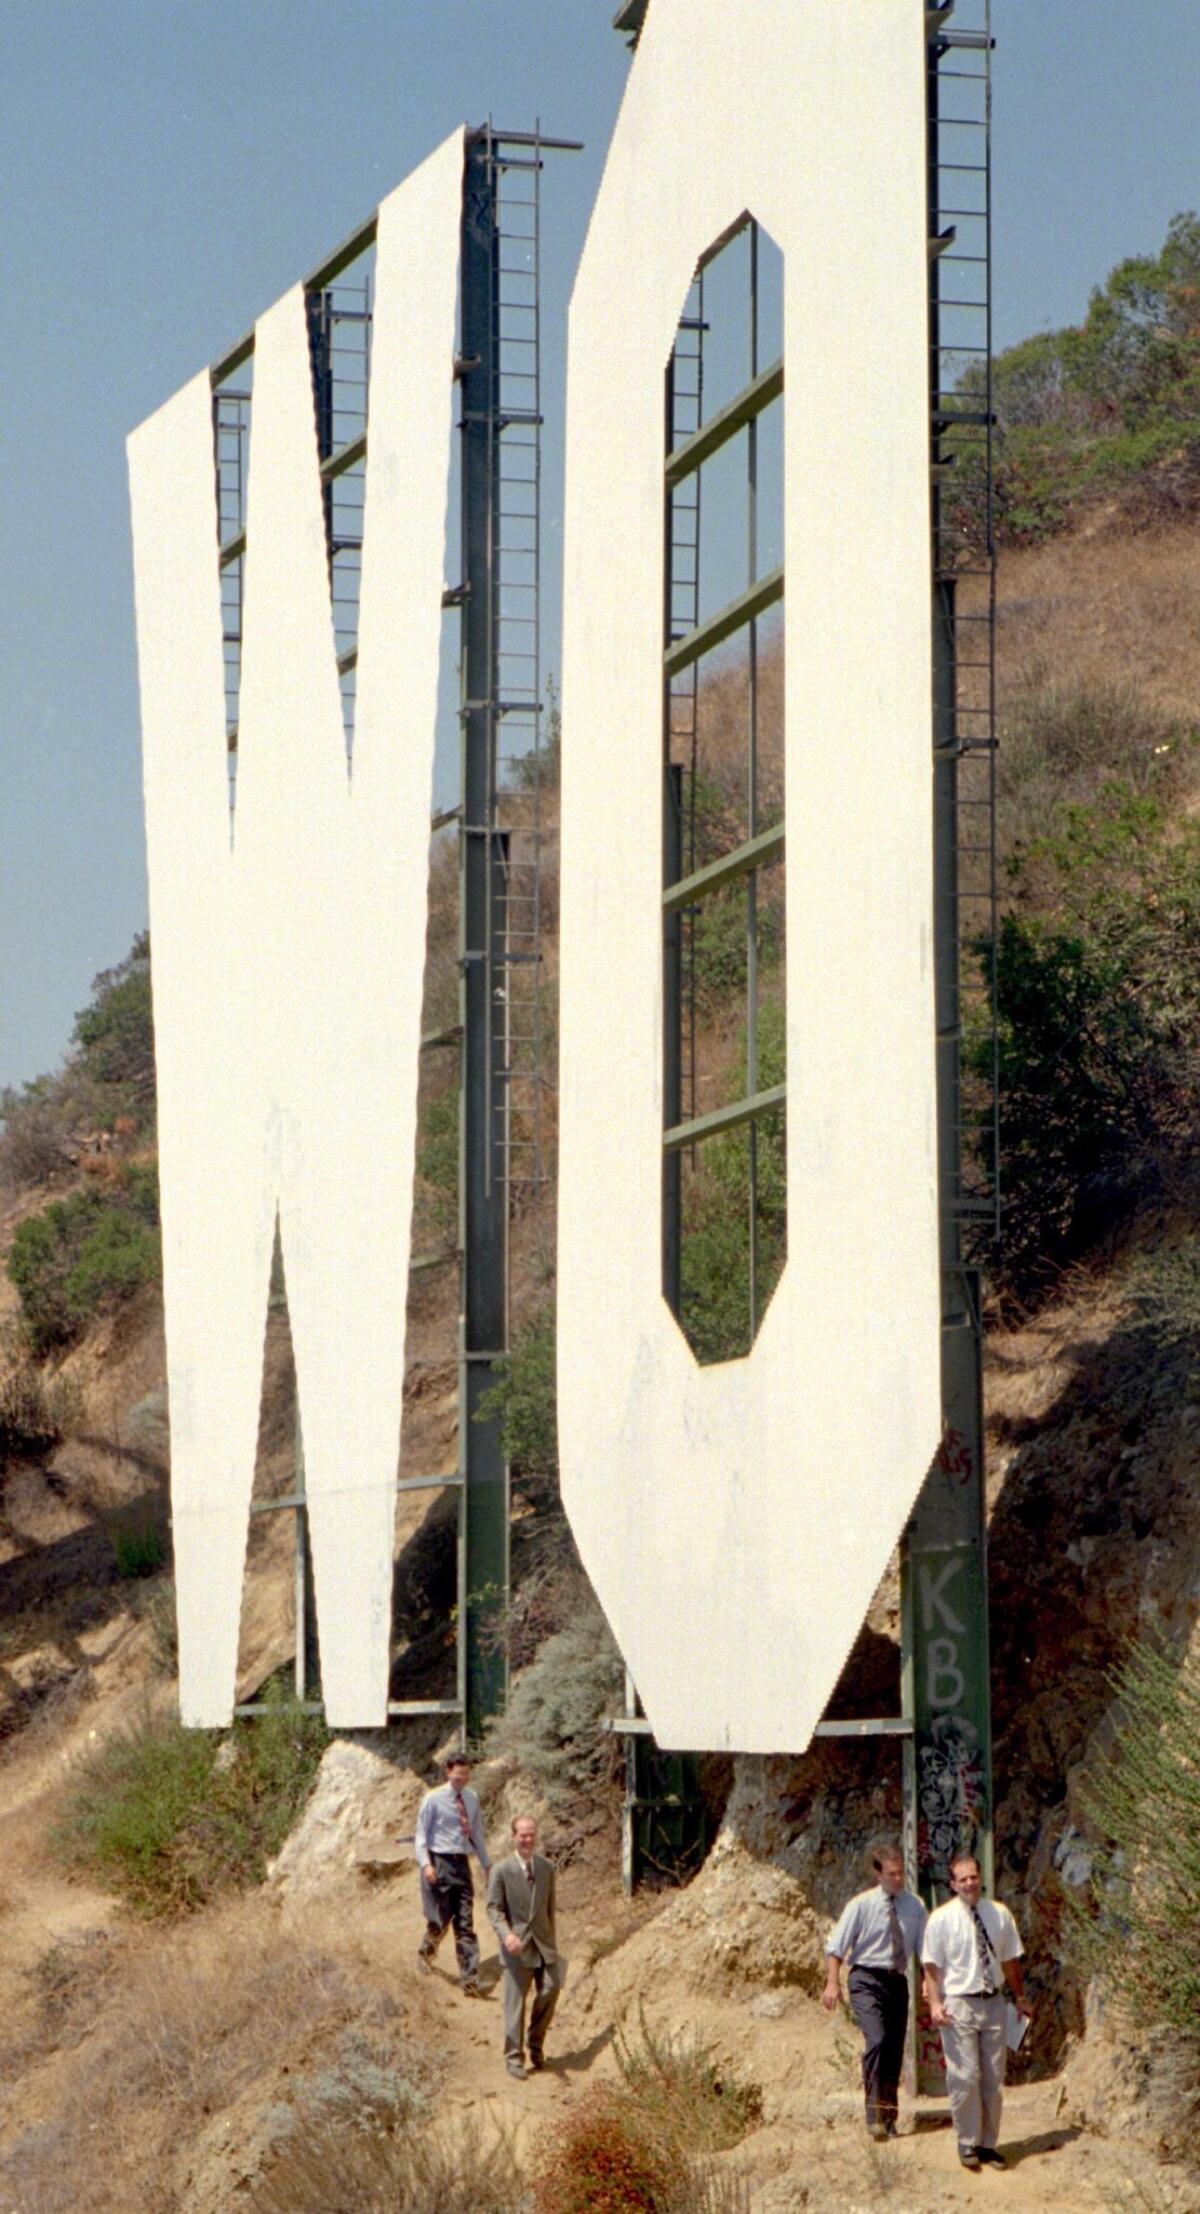 A portion of the Hollywood sign in 1996.